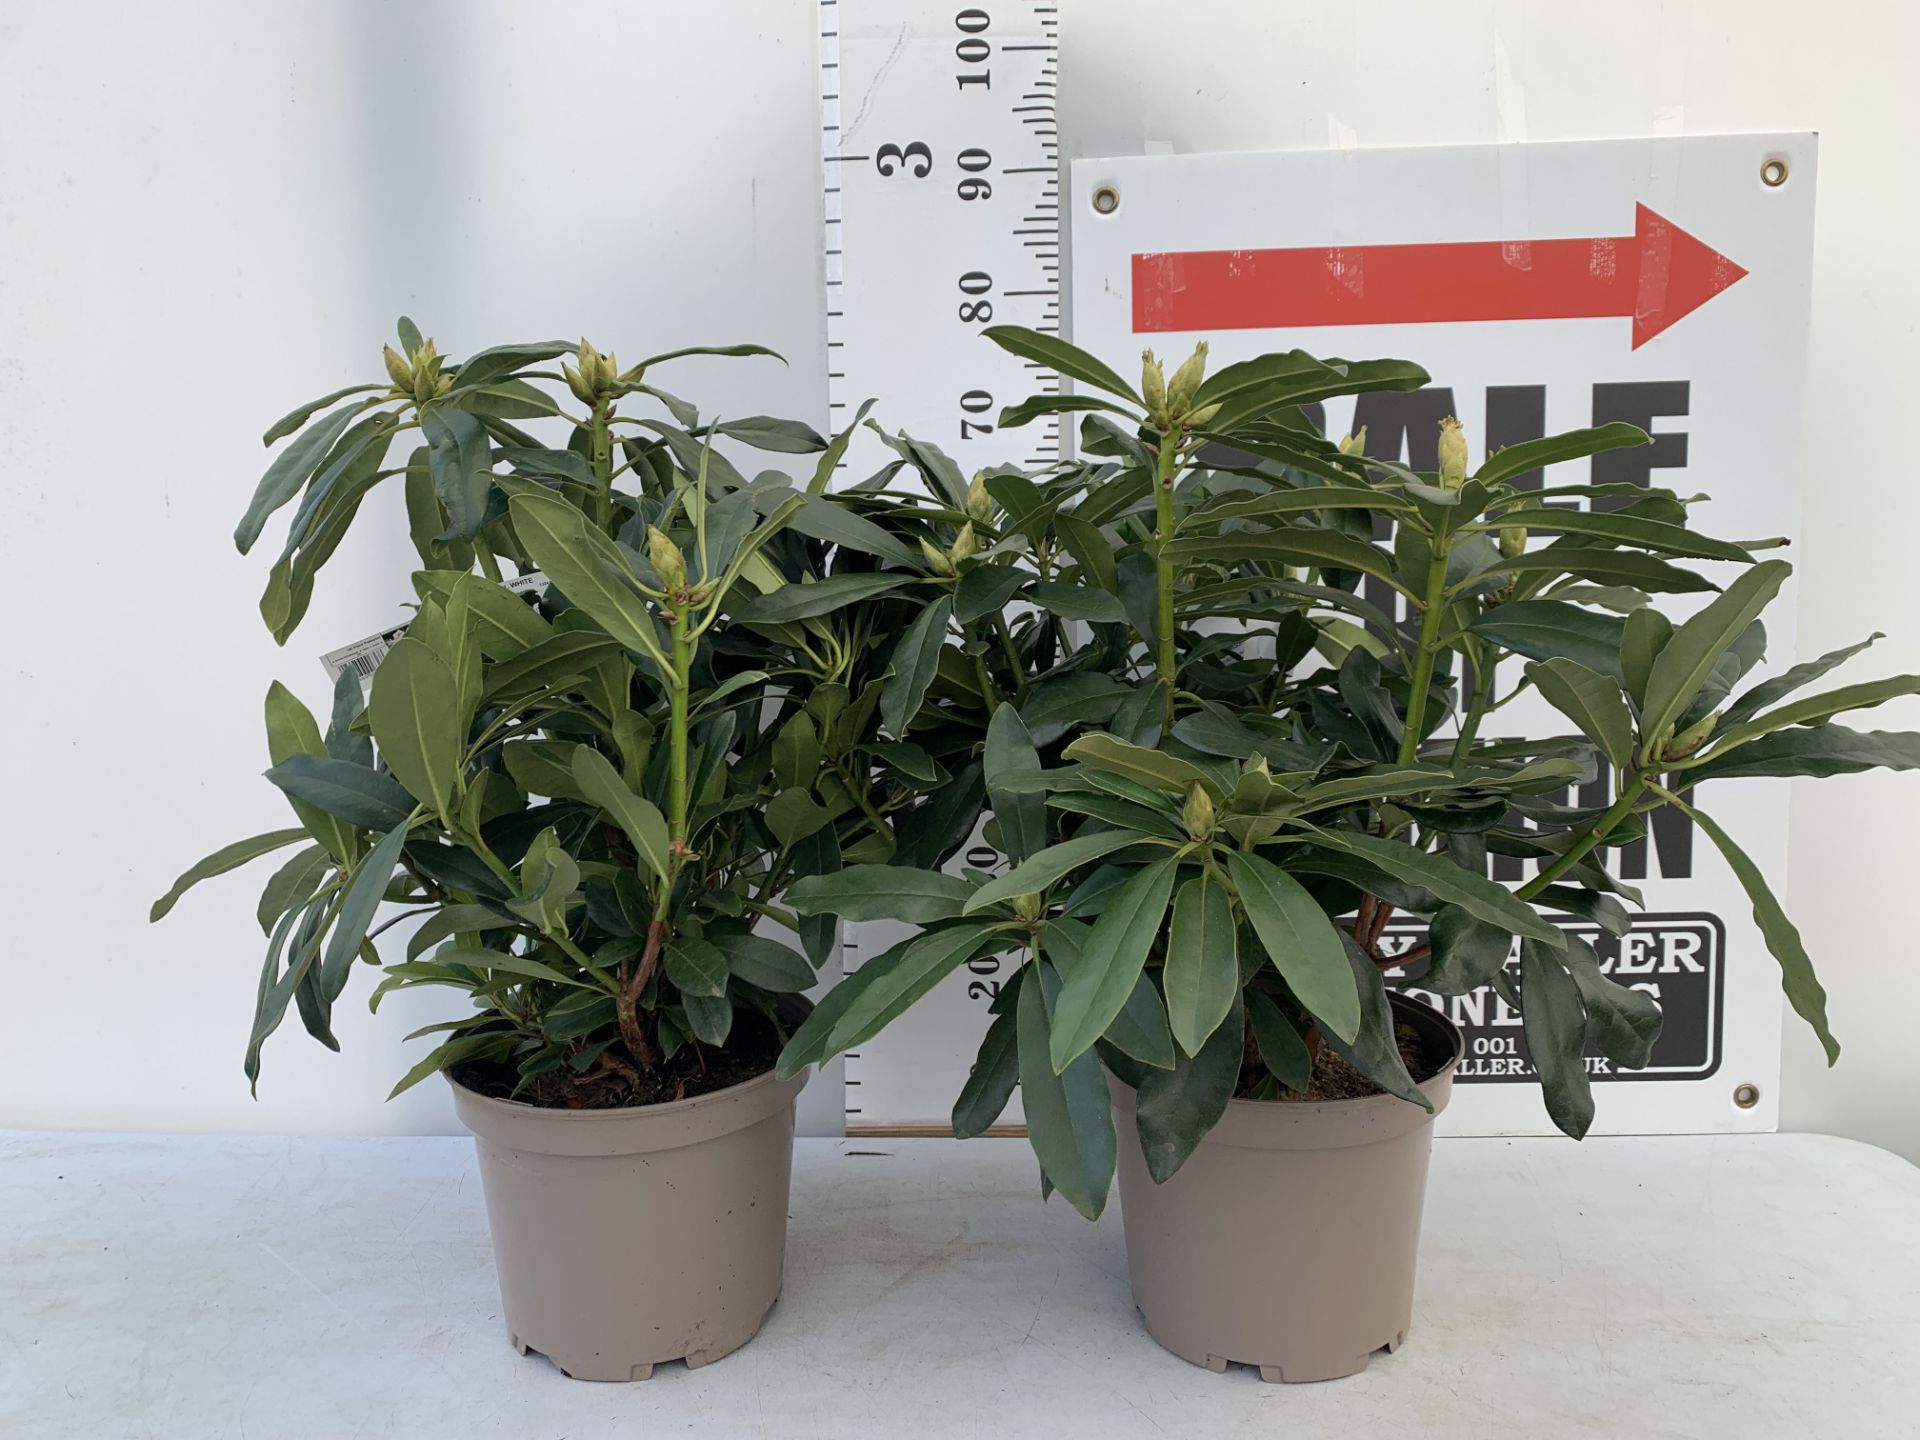 TWO RHODODENDRONS MADAME MASSON WHITE IN 7.5 LTR POTS APPROX 70CM IN HEIGHT PLUS VAT TO BE SOLD